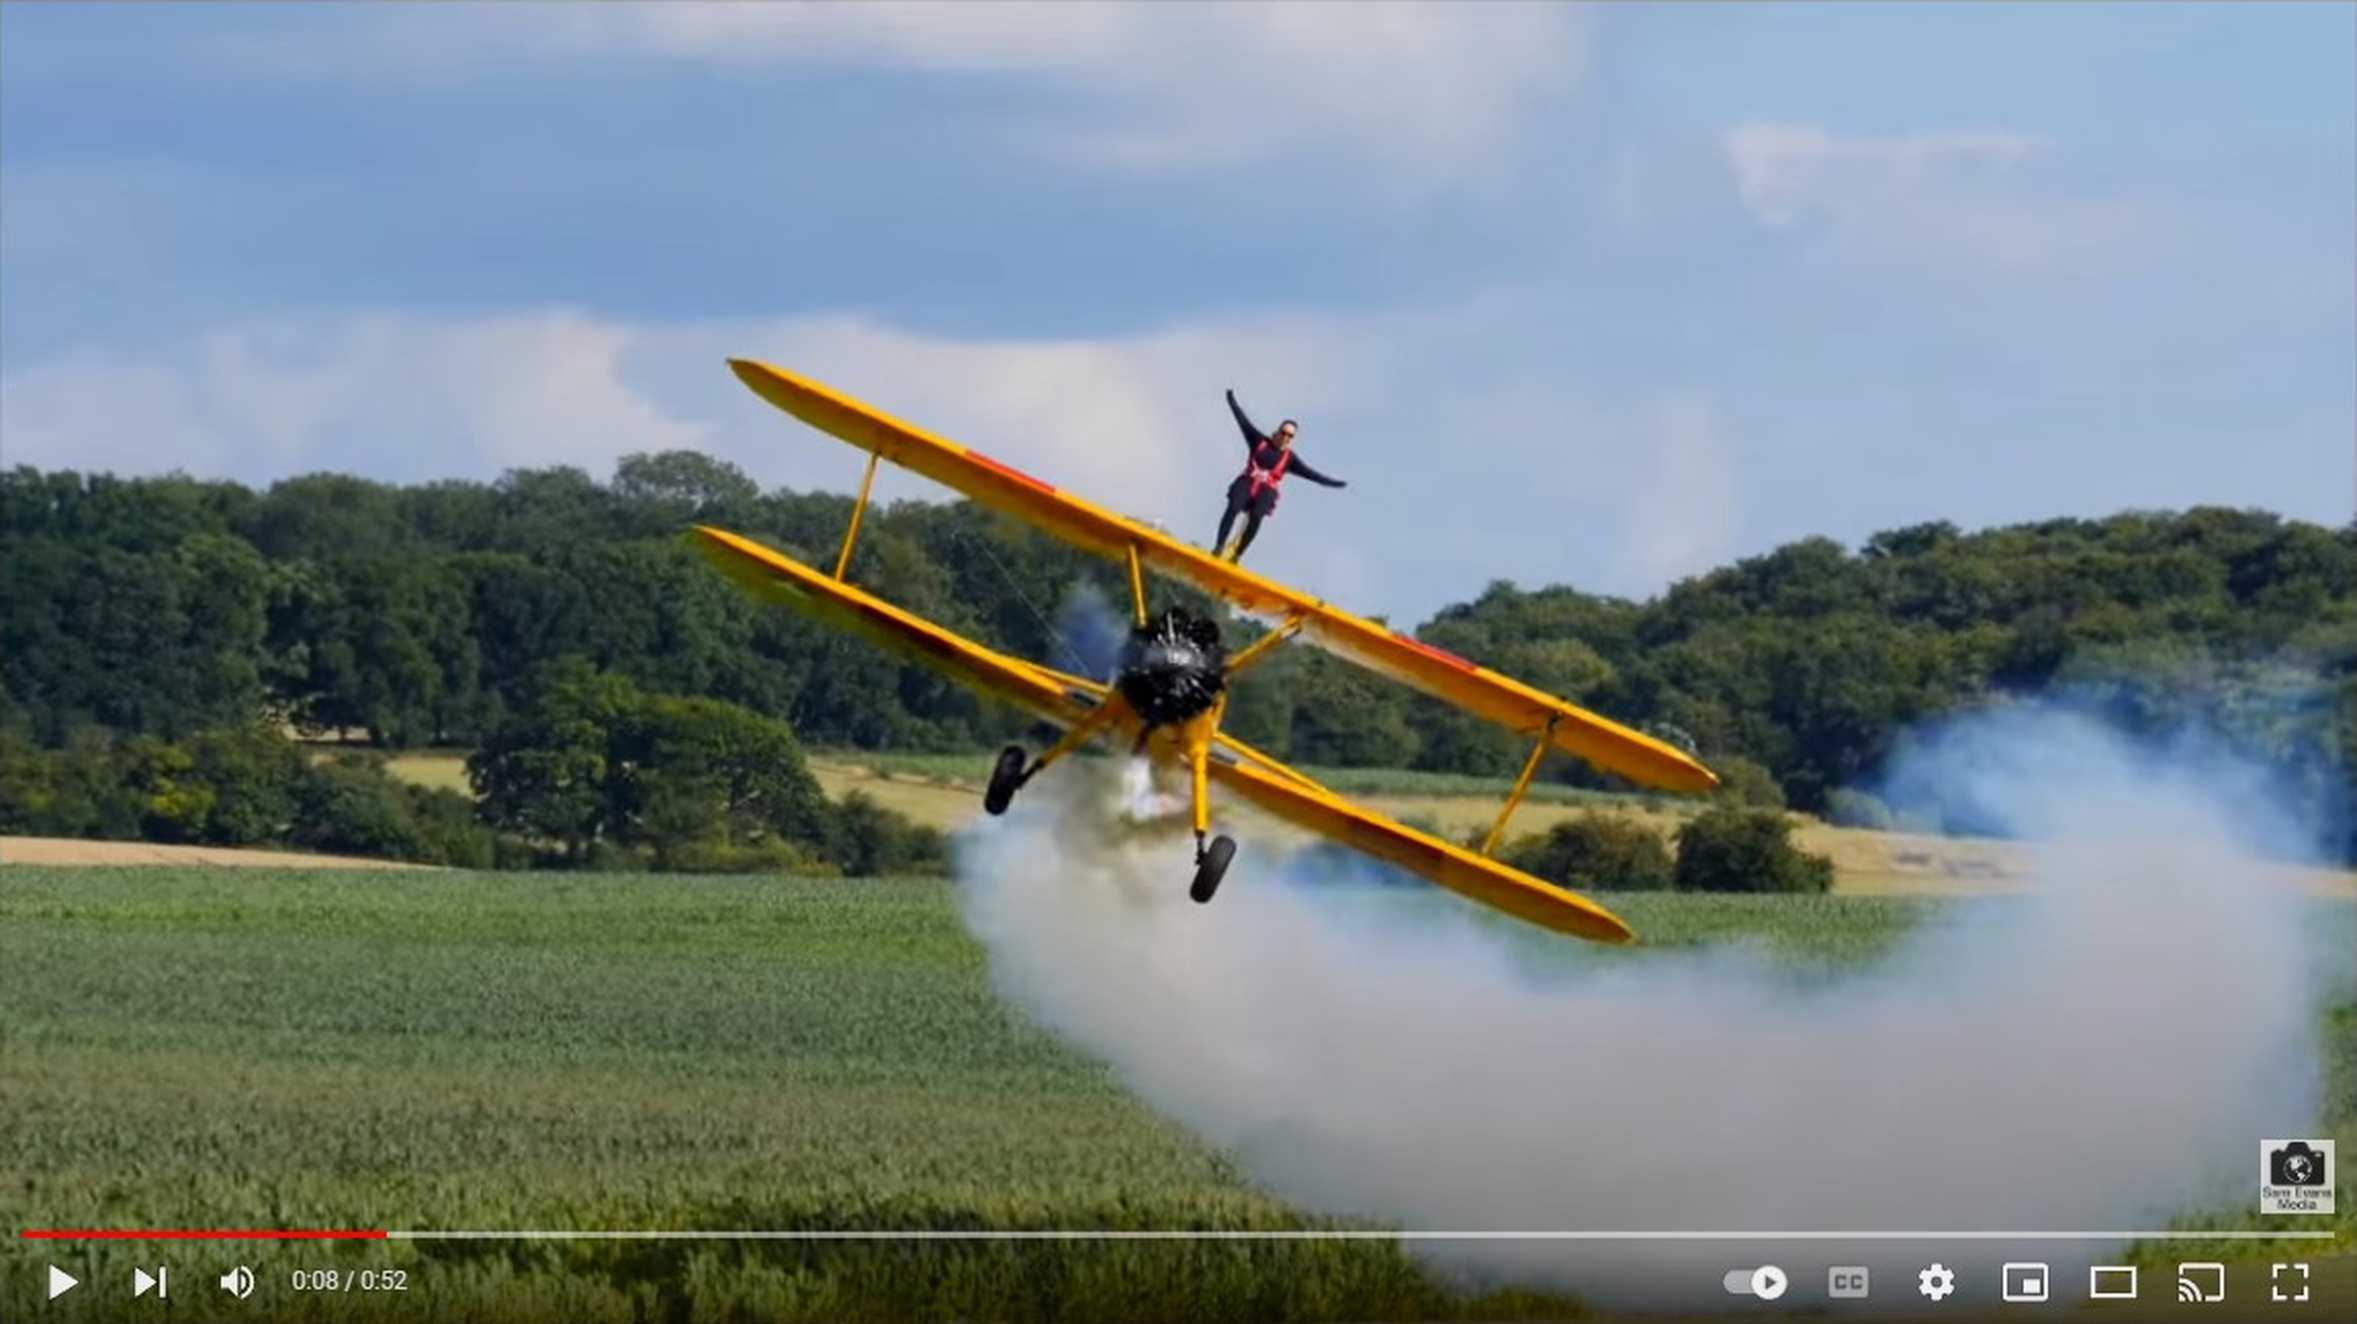 A still taken from a video of a person taking on a wing walk.